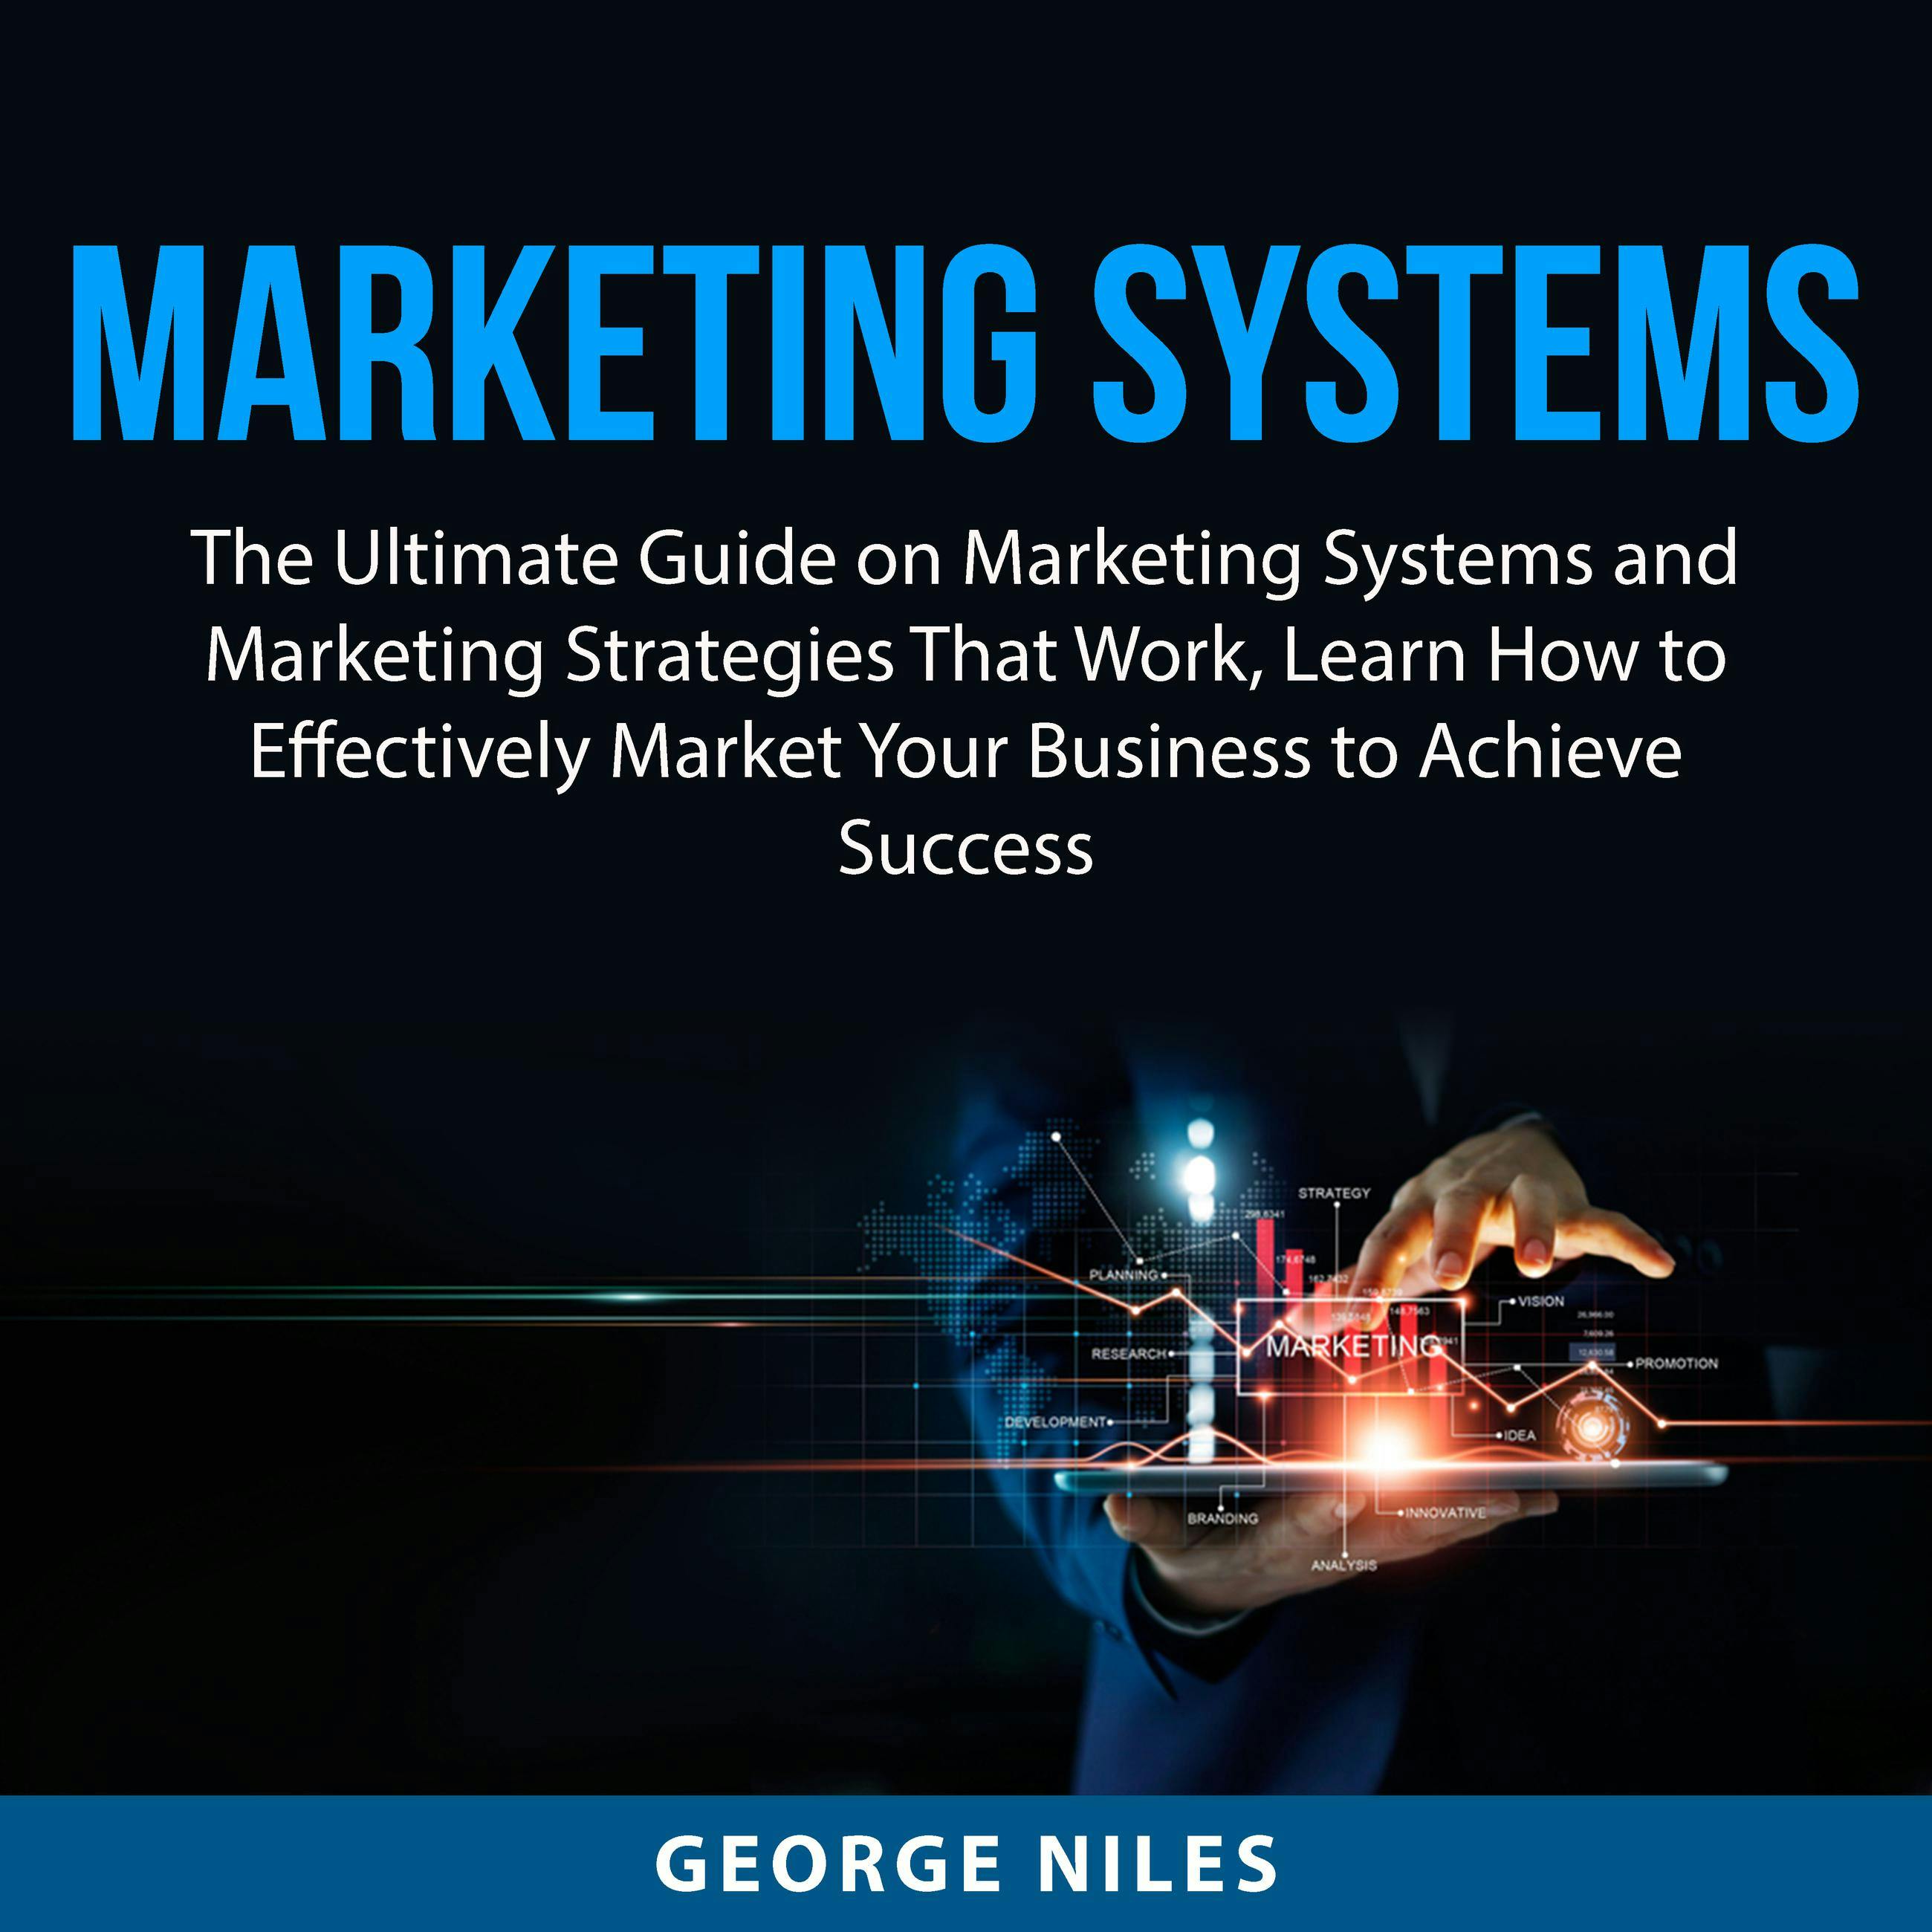 Marketing Systems: The Ultimate Guide on Marketing Systems and Marketing Strategies That Work, Learn How to Effectively Market Your Business to Achieve Success - undefined